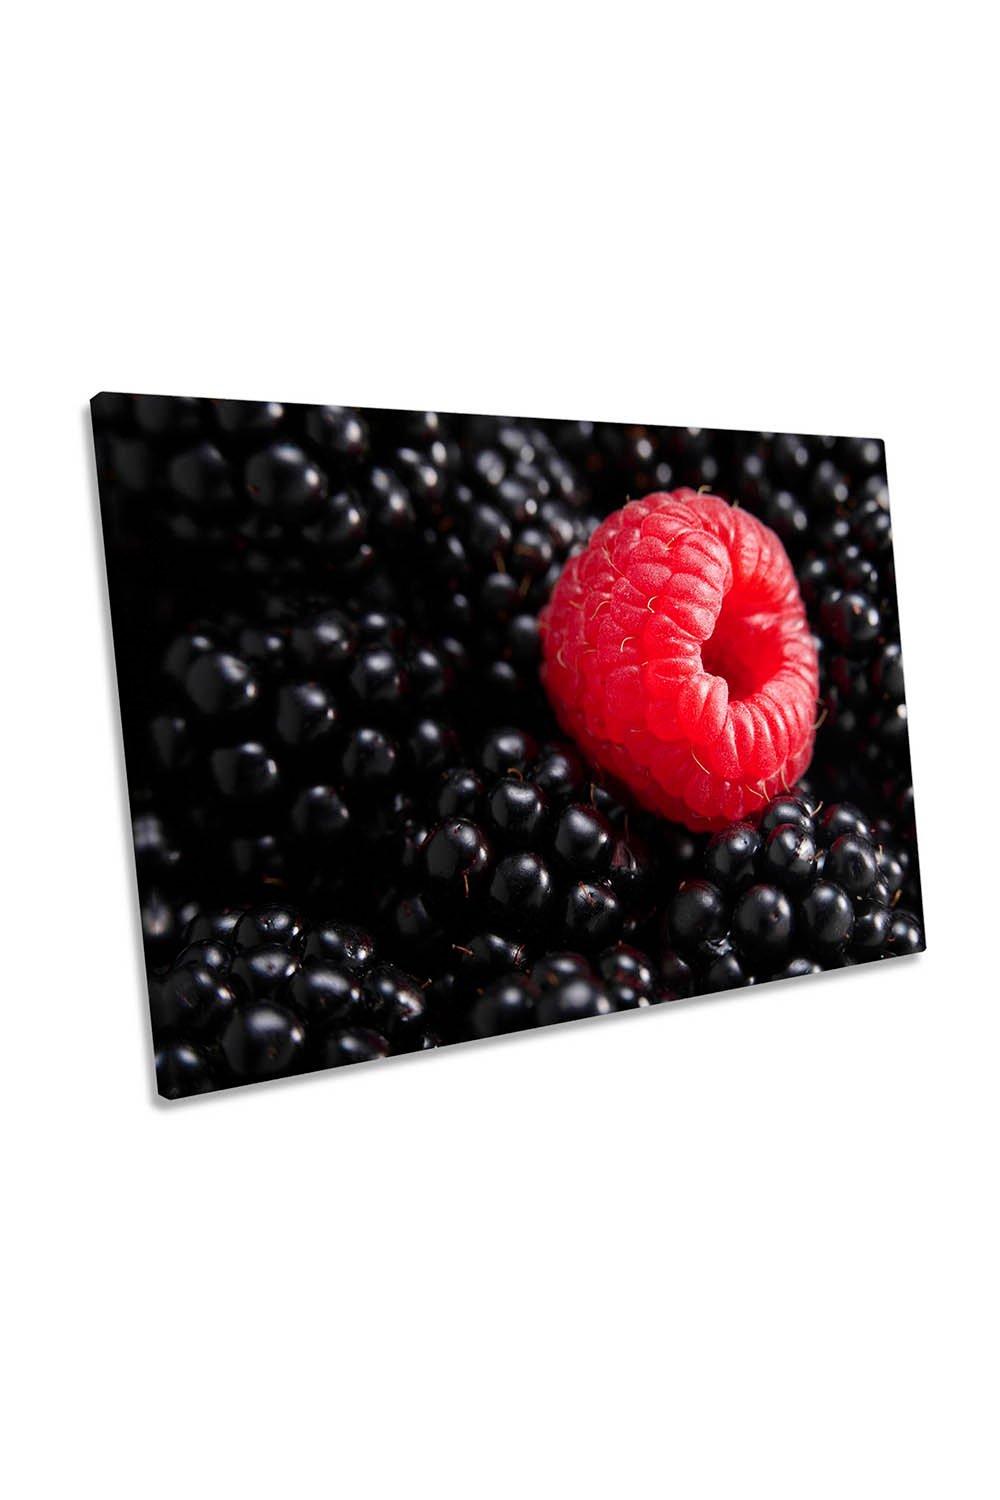 Berry Different Raspberries Kitchen Canvas Wall Art Picture Print